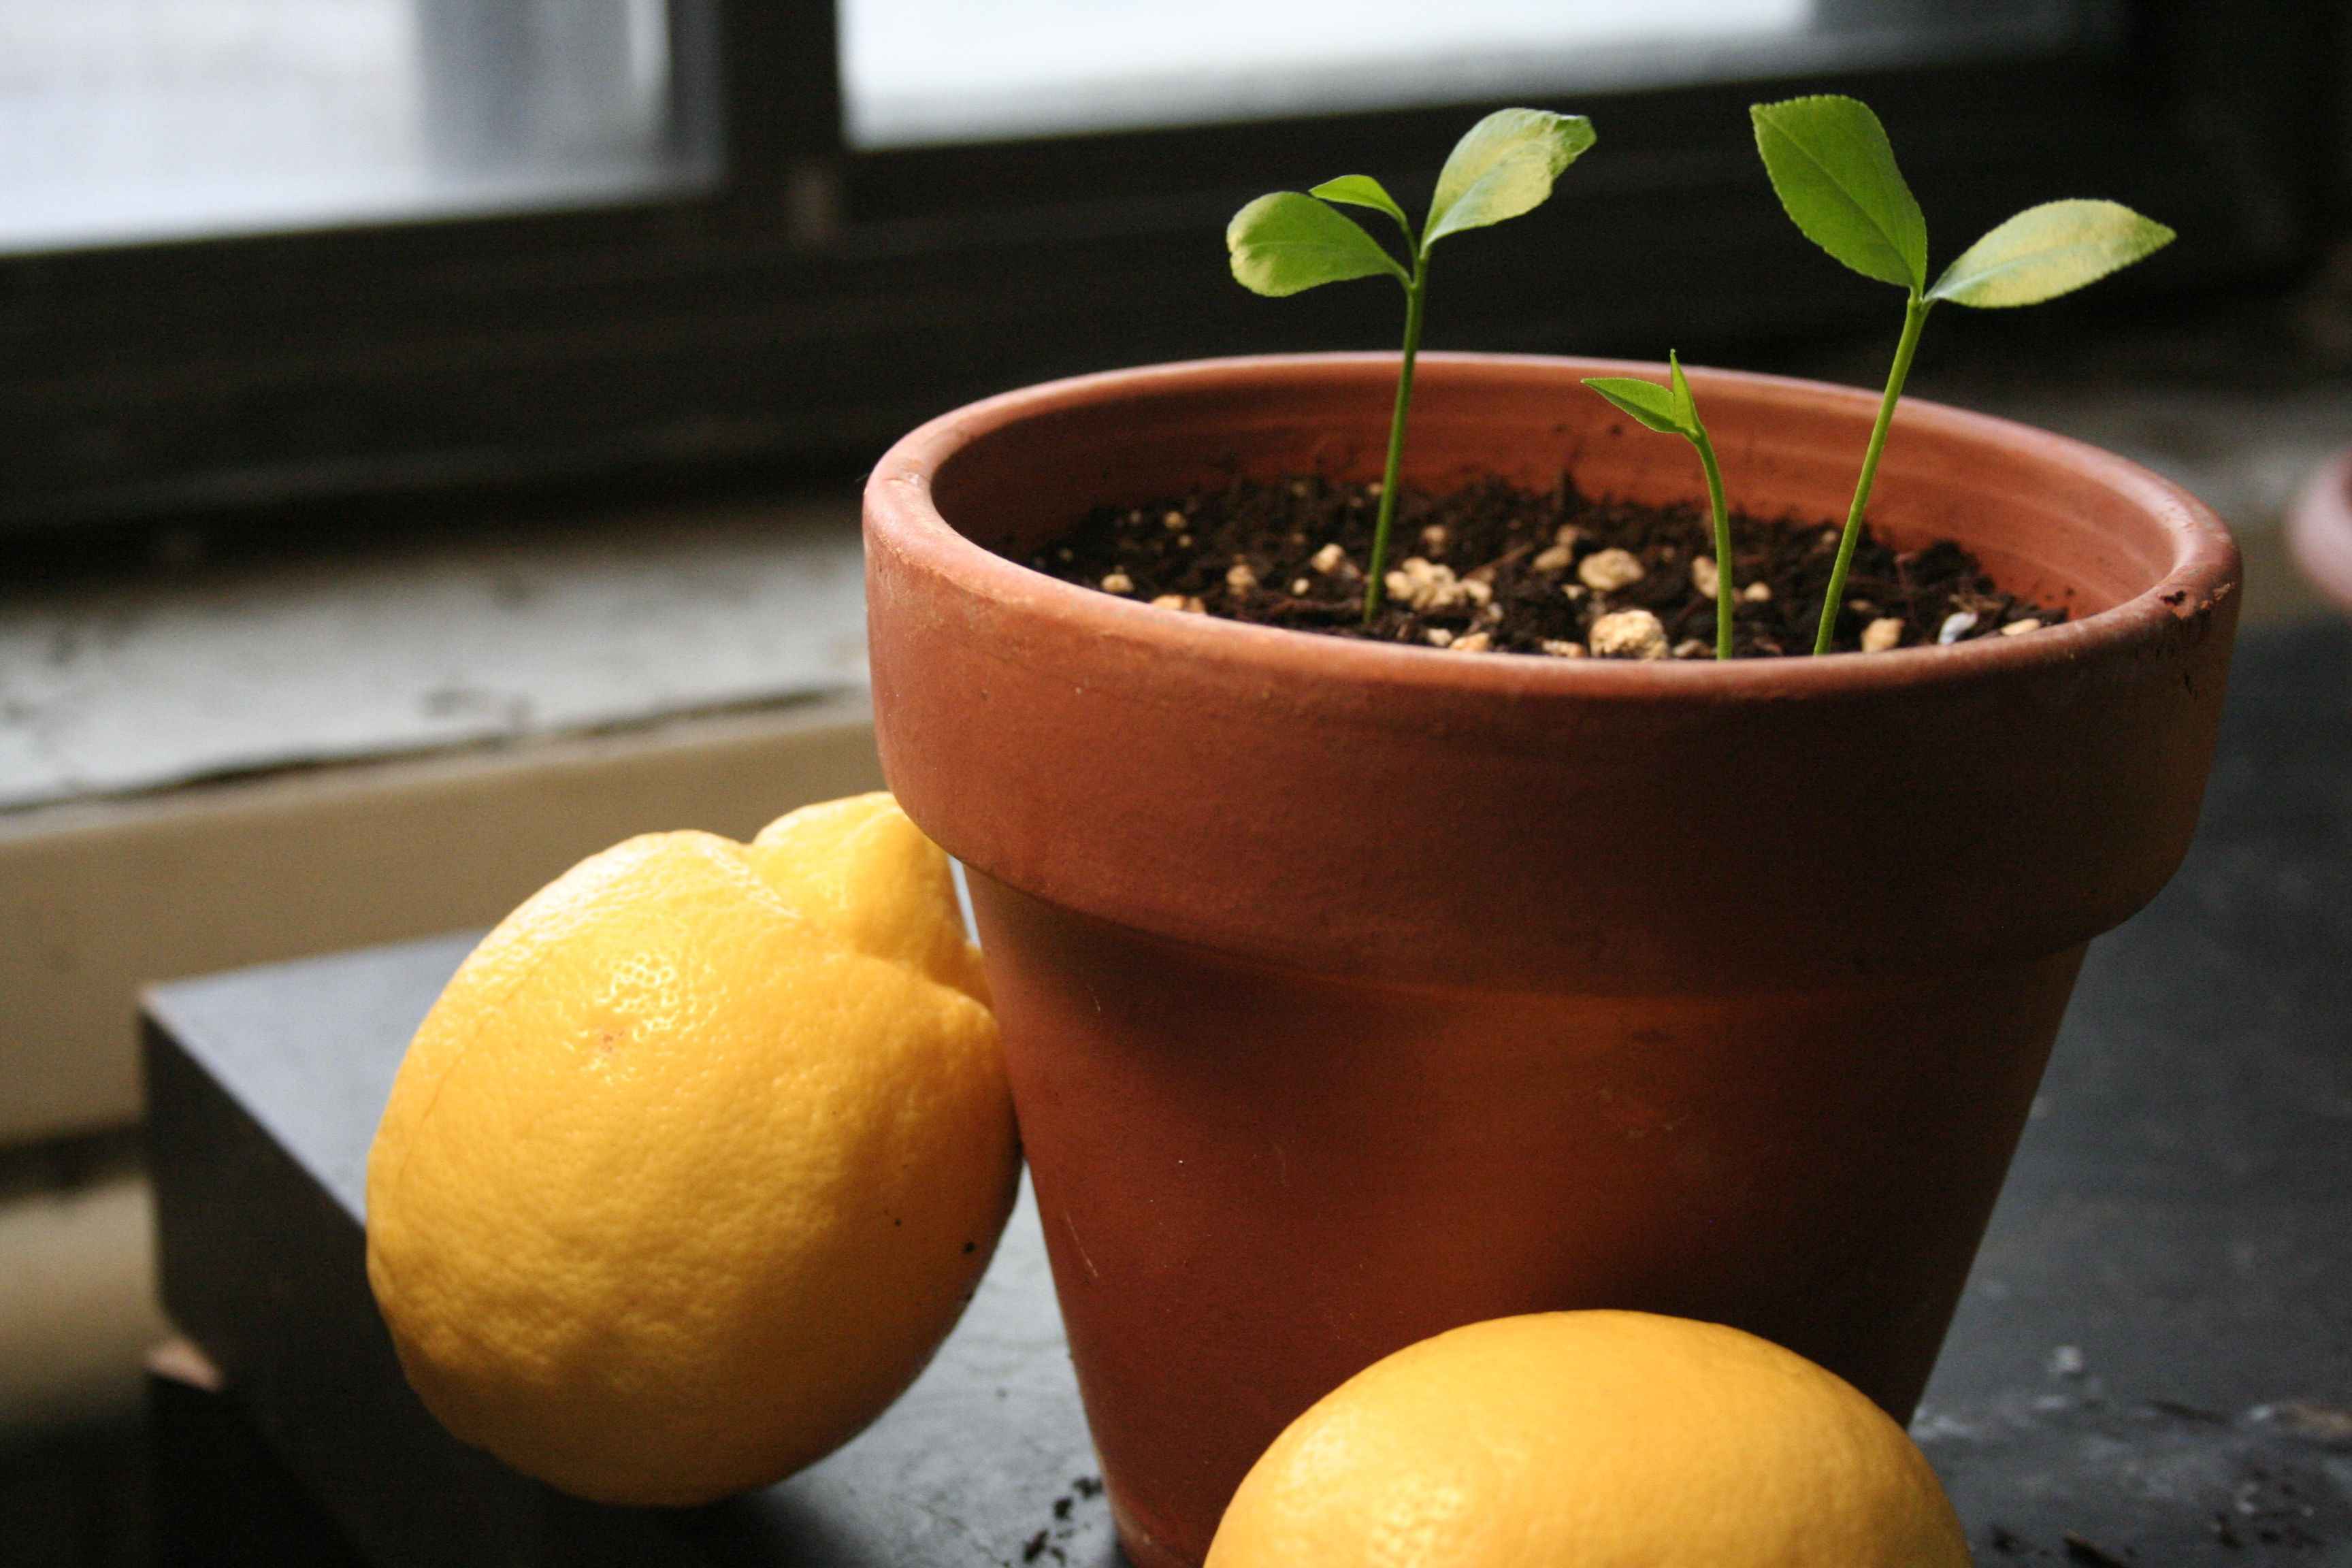 How To Use Lemon Seeds For Planting